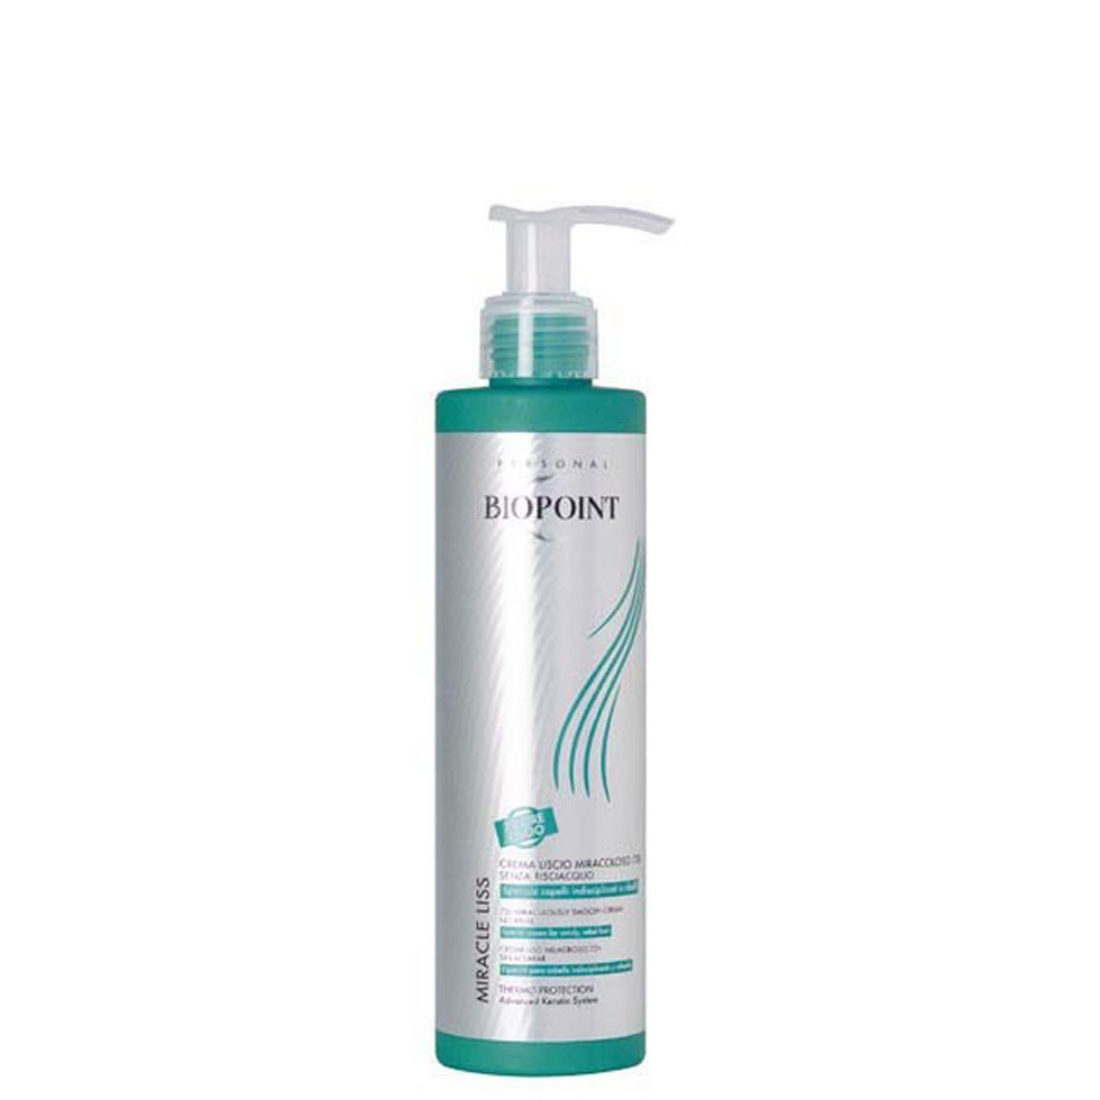 BIOPOINT PERSONAL MIRACLE LISS